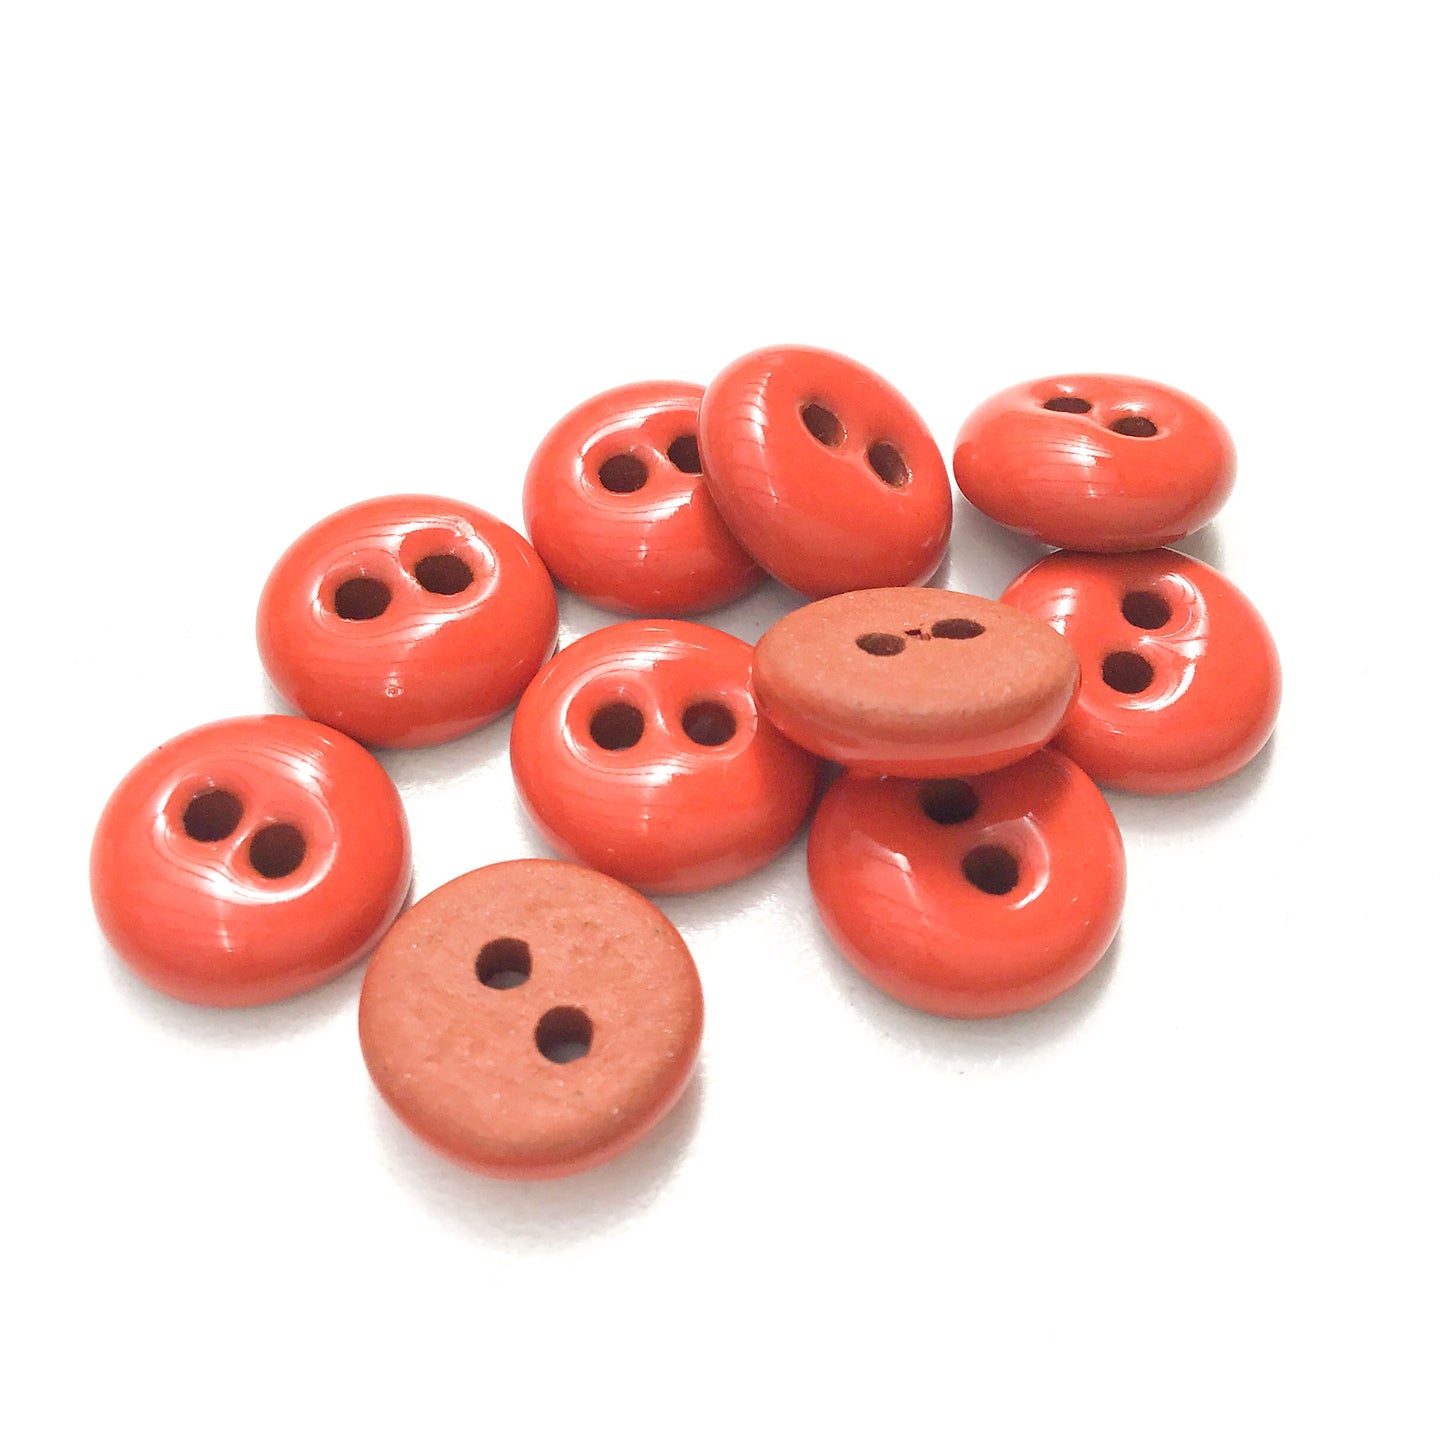 Red-Orange Ceramic Buttons - Hand Made Clay Buttons - 7/16" - 10 Pack